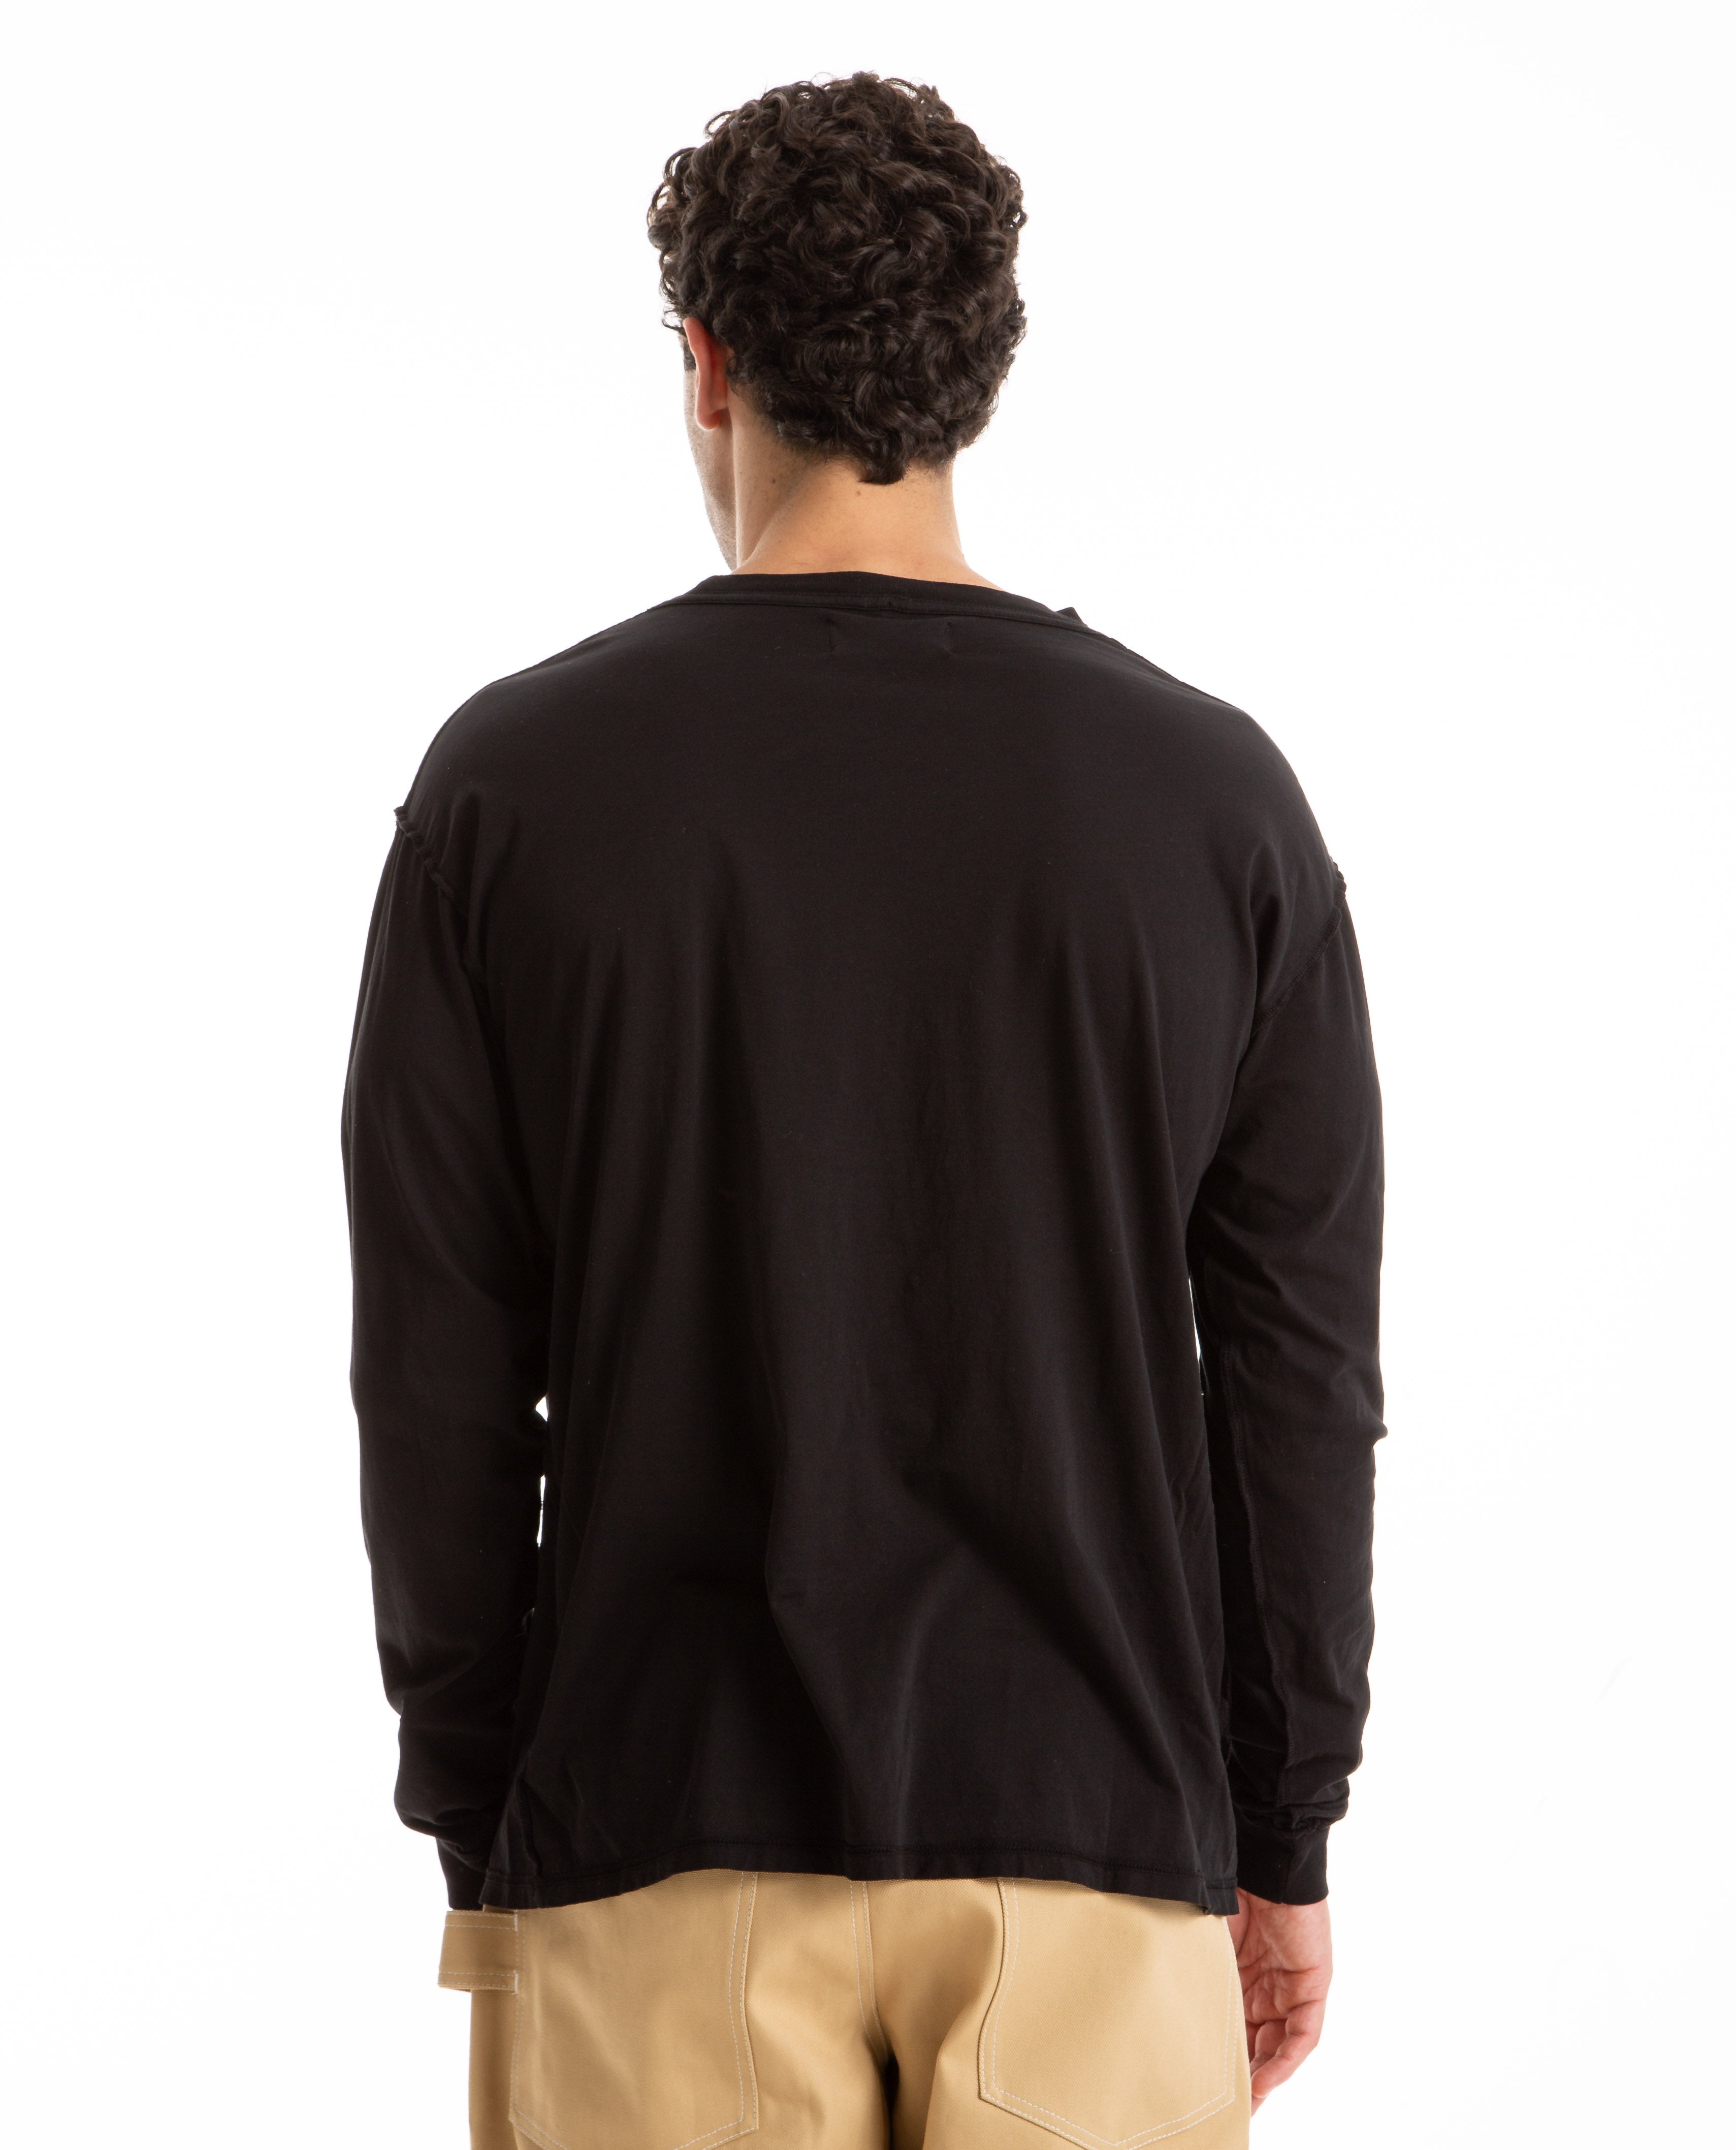 Inside Out Long Sleeve